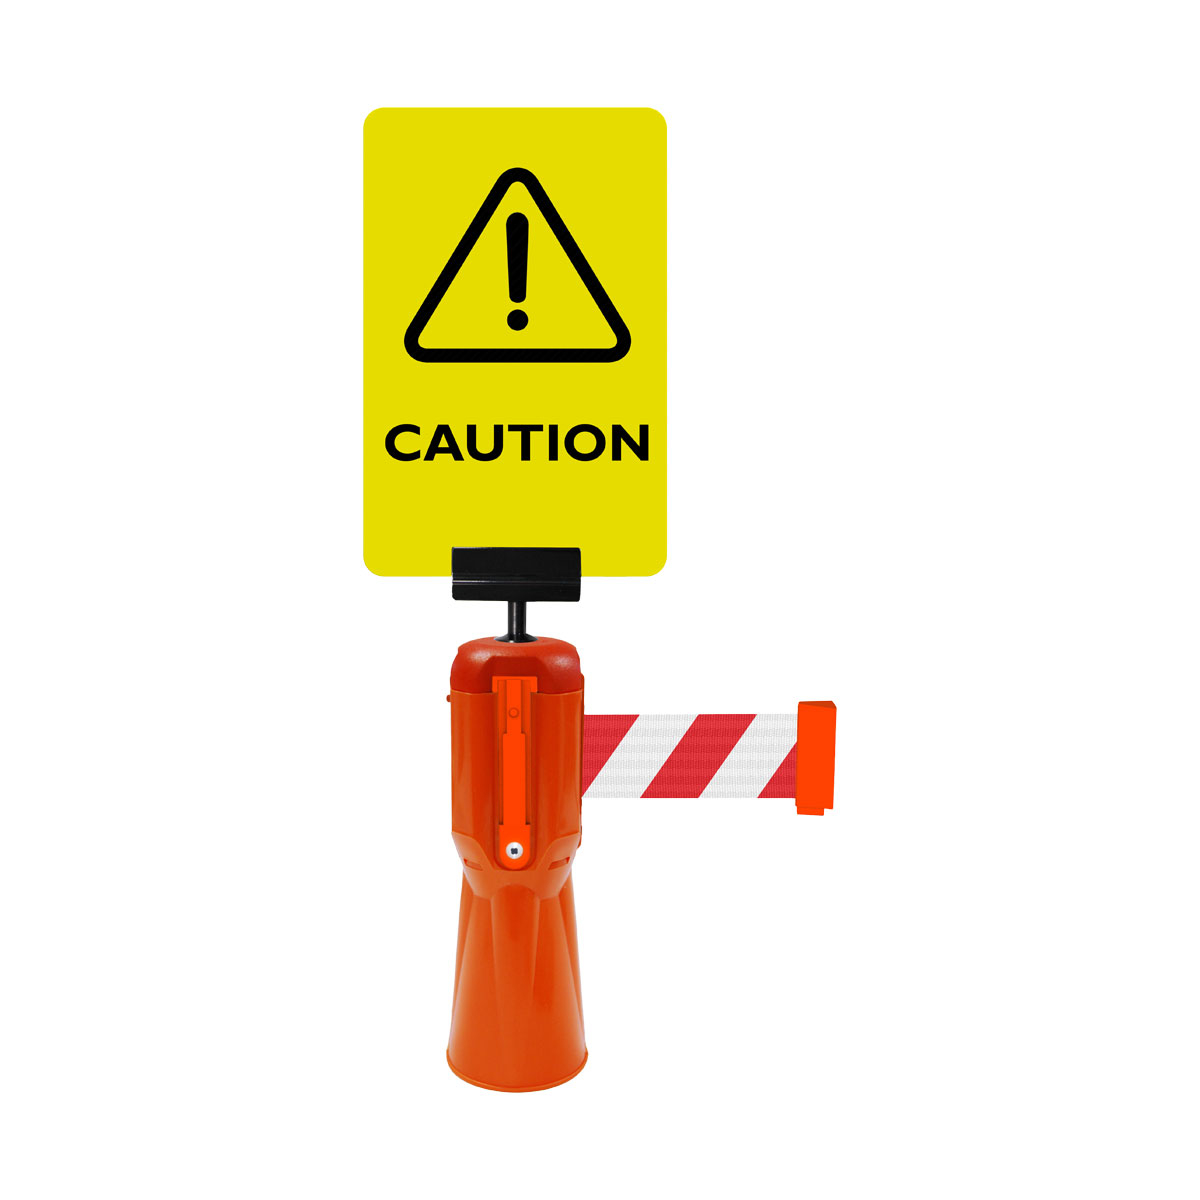 Tensa Traffic Cone Topper Safety Barrier With Optional Sign Holder For Displaying Warning Messages